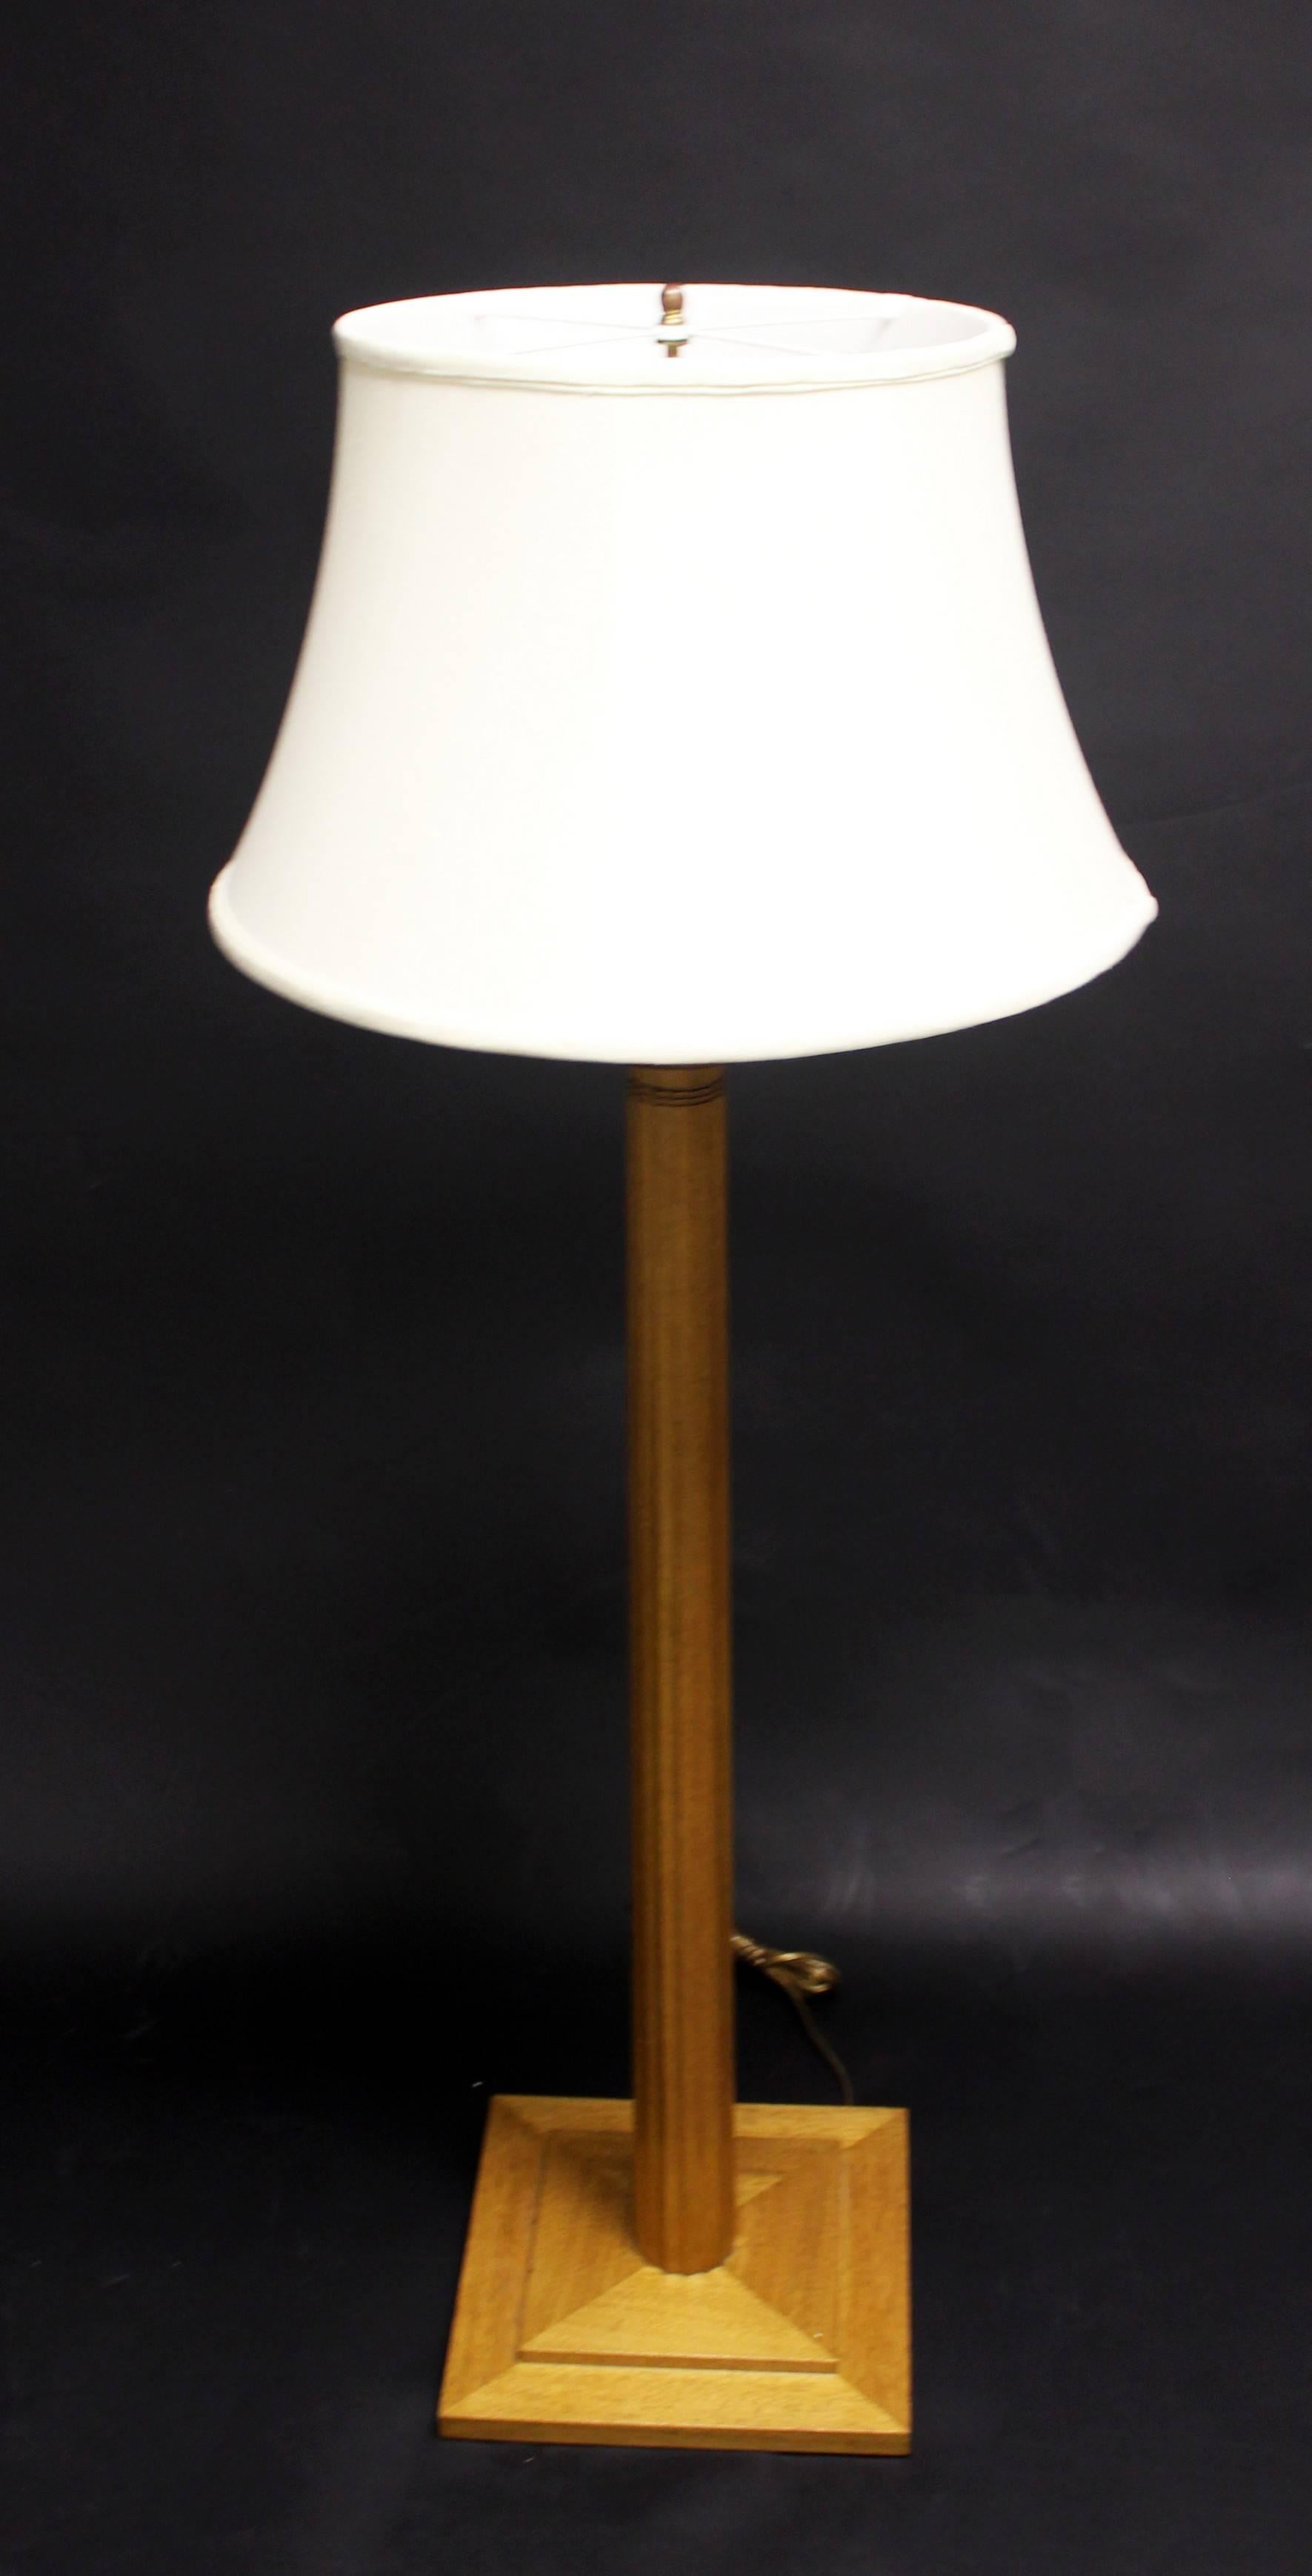 For your consideration is a pair of beautifully crafted floor lamps by T.H. Robsjohn-Gibbings, with their original linen shades. Made of walnut wood and enameled metal in excellent condition. The dimensions of the lamps are 12